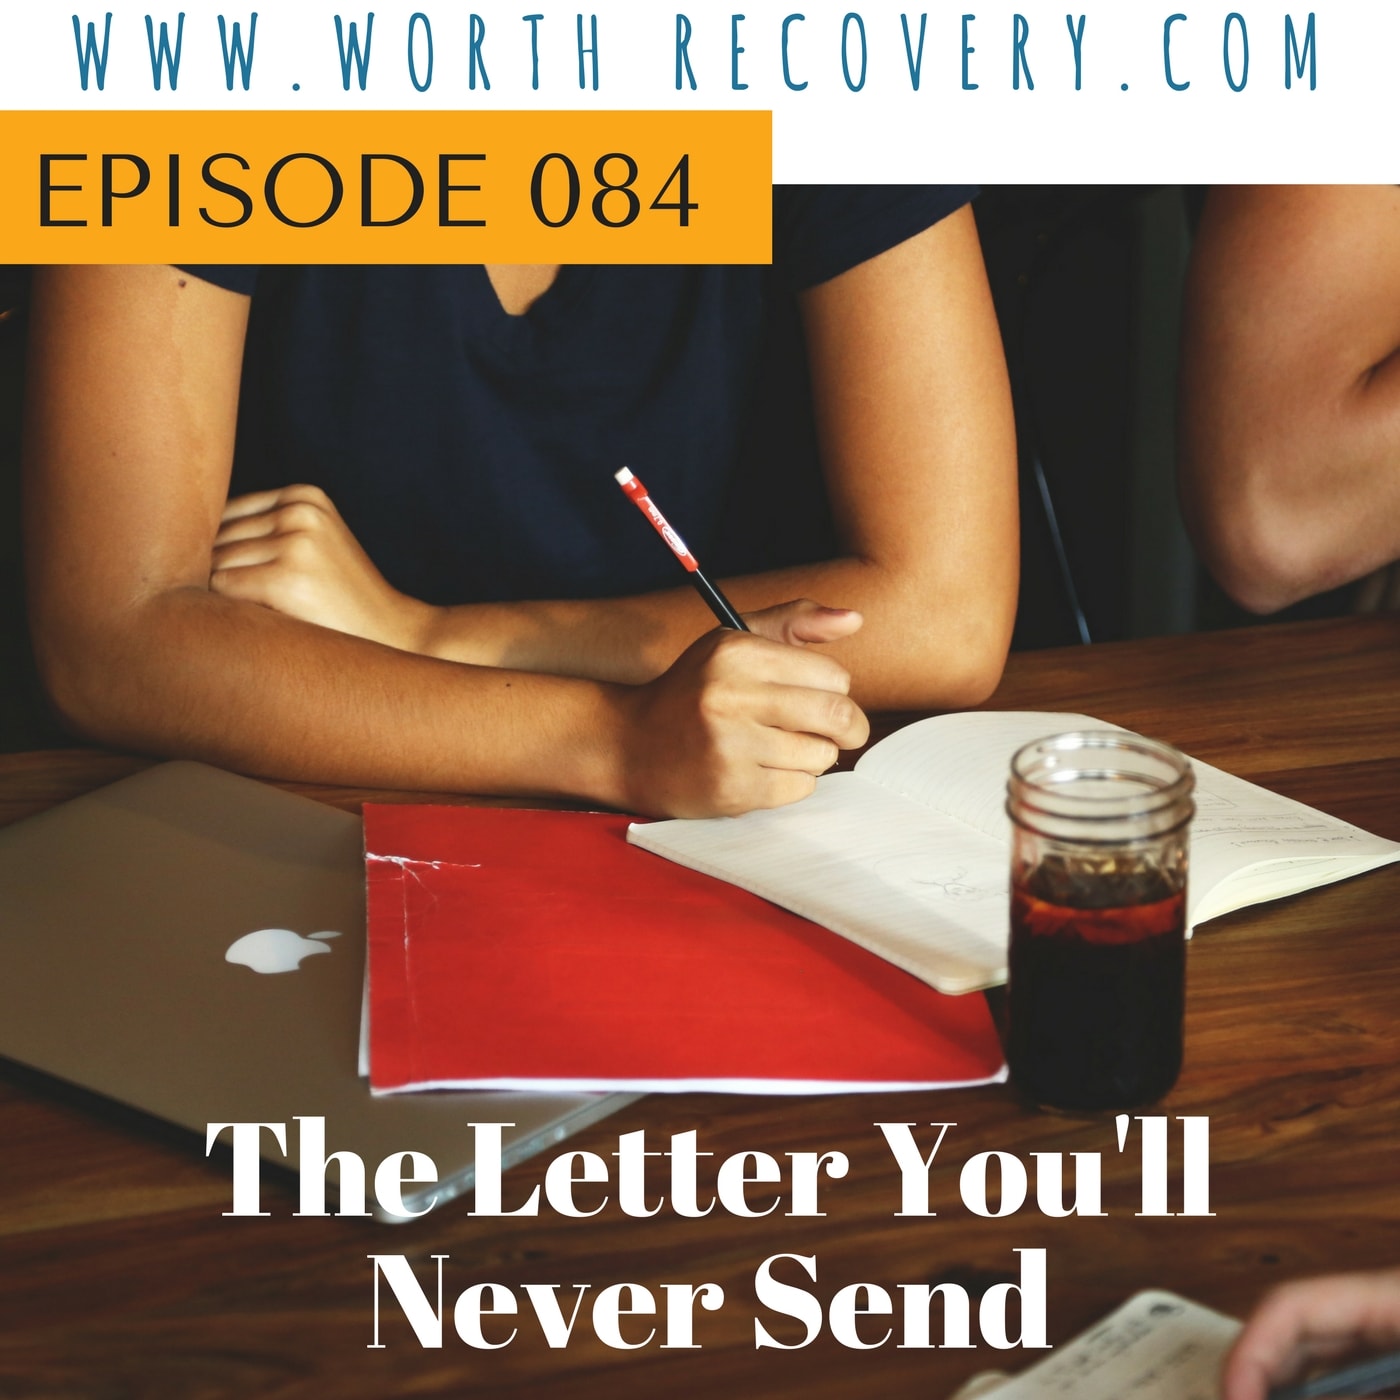 Episode 084: The Letter You'll Never Send